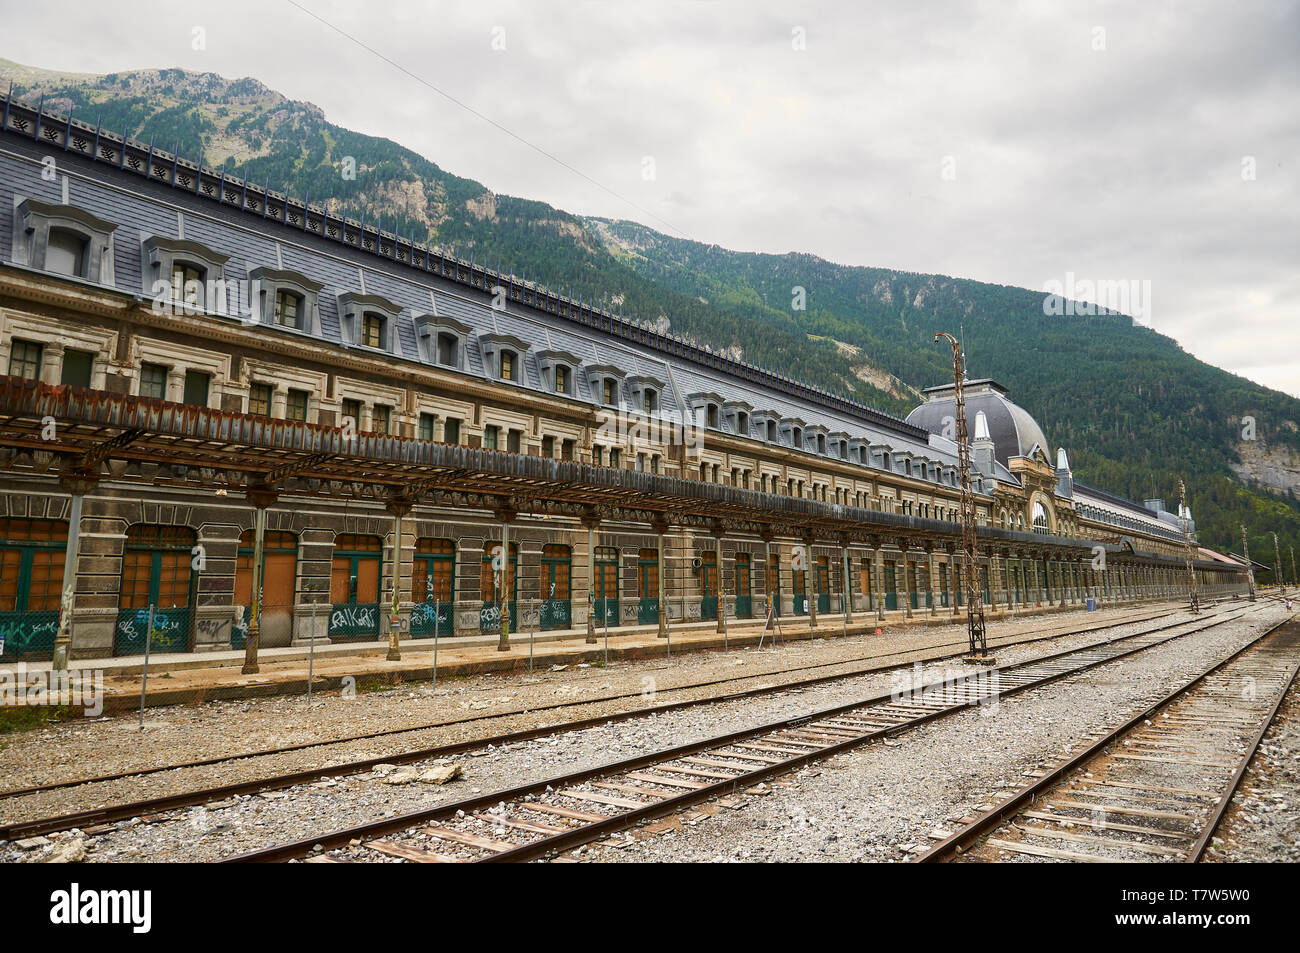 Frontage of the abandoned Canfranc International railway station and its railway tracks (Canfranc, Pyrenees, Jacetania, Huesca, Aragon, Spain) Stock Photo